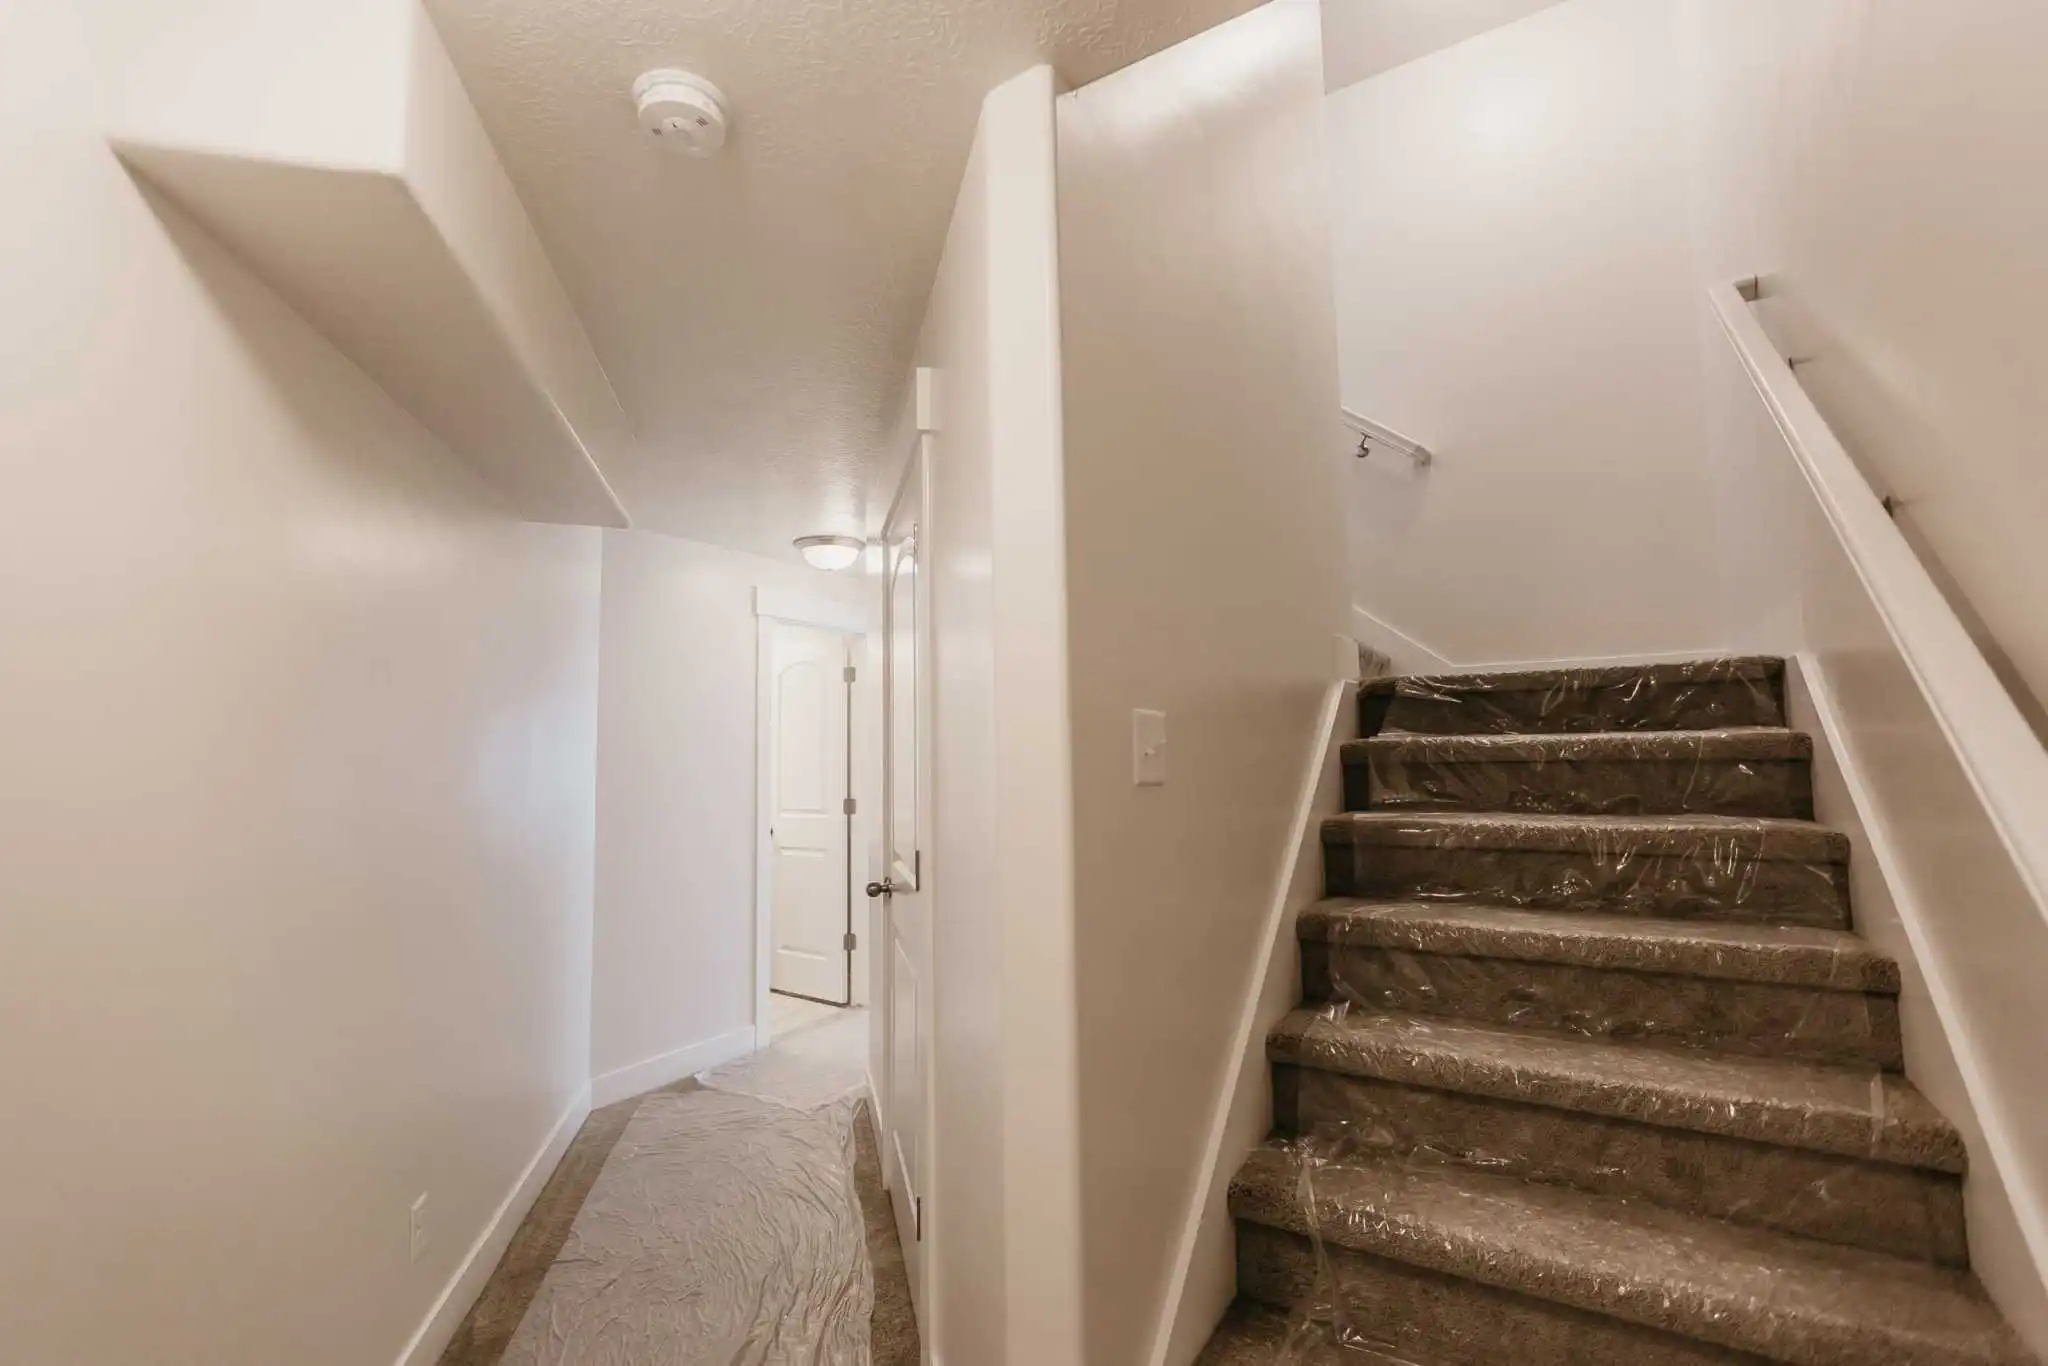 View of stairs and hallway in a finished basement